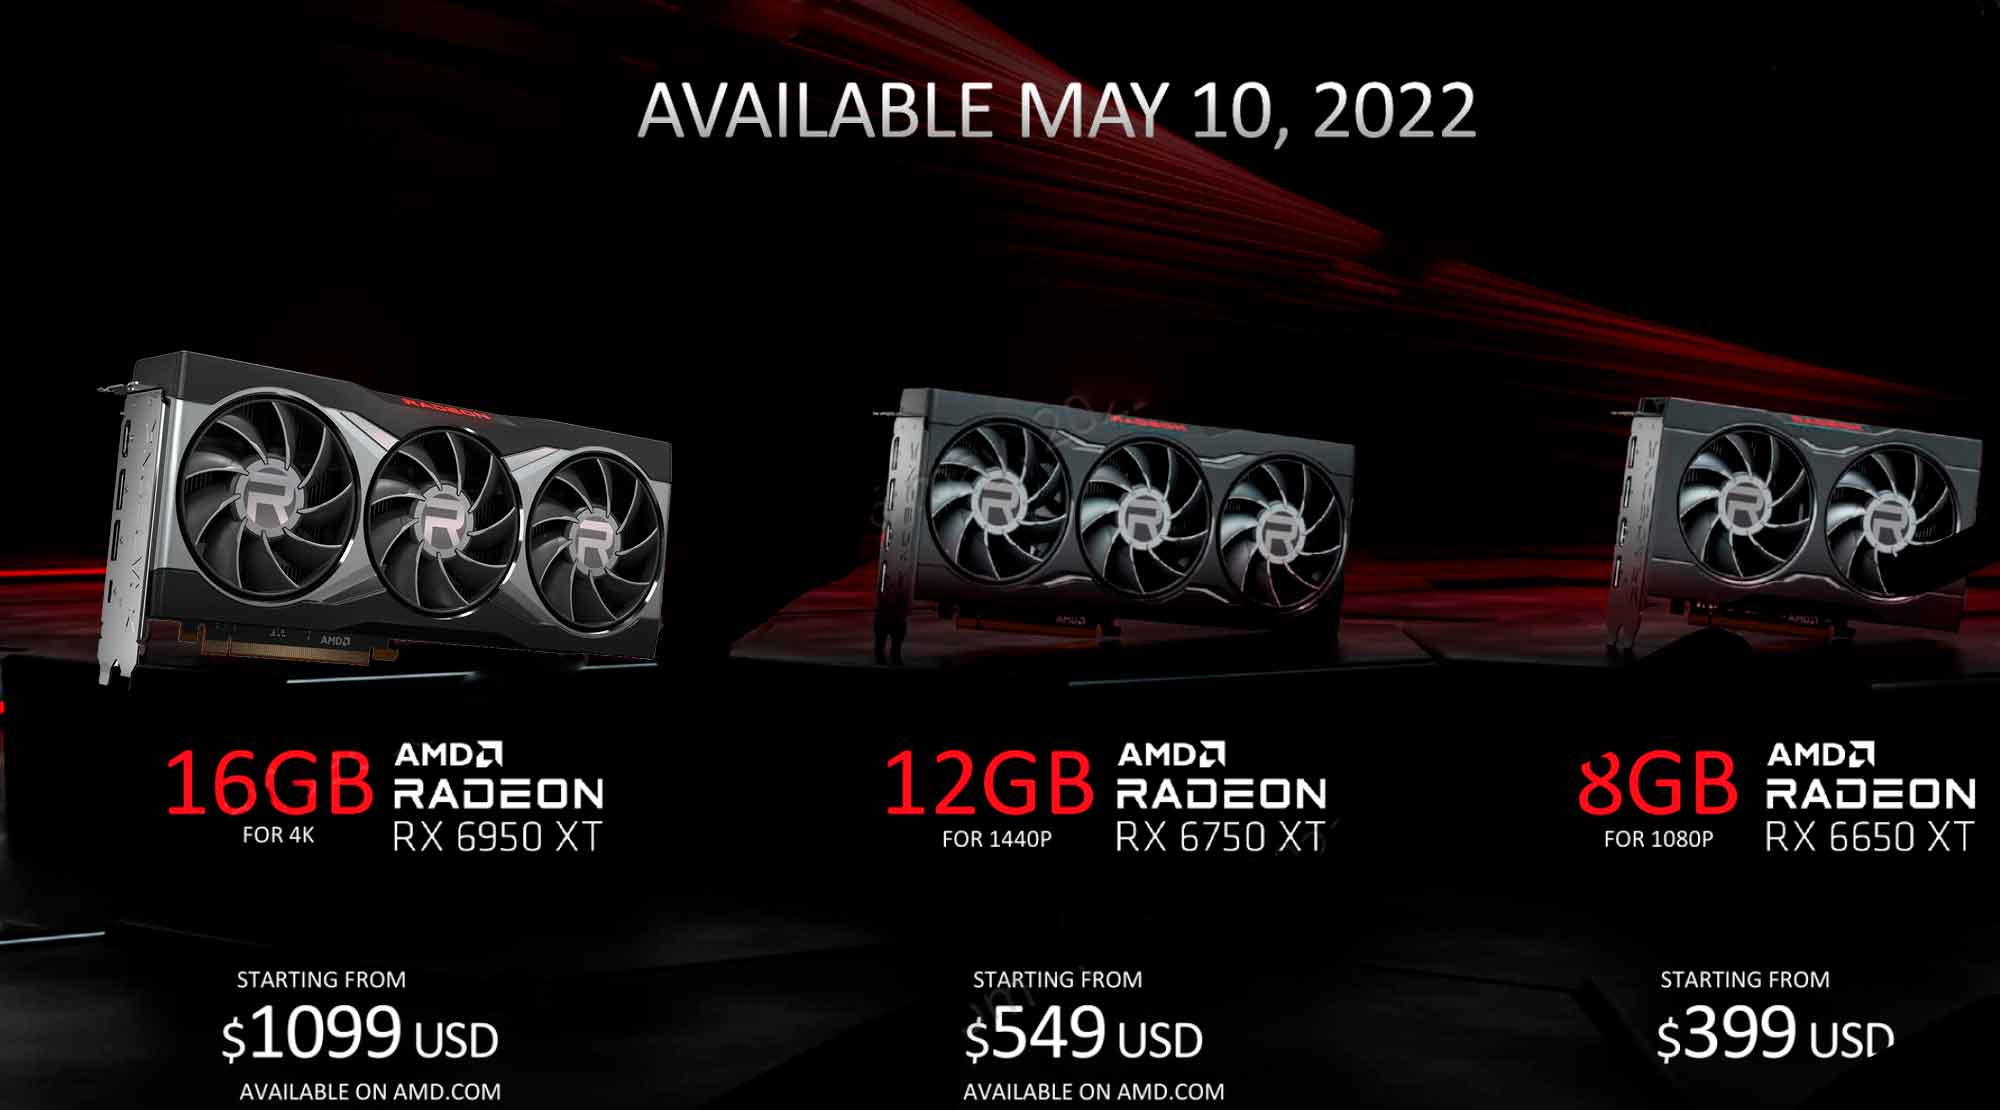 The AMD Radeon RX will be priced at USD1,099 for the 6950XT, USD549 for the RX 6750XT, and USD399 for the RX 6650XT.